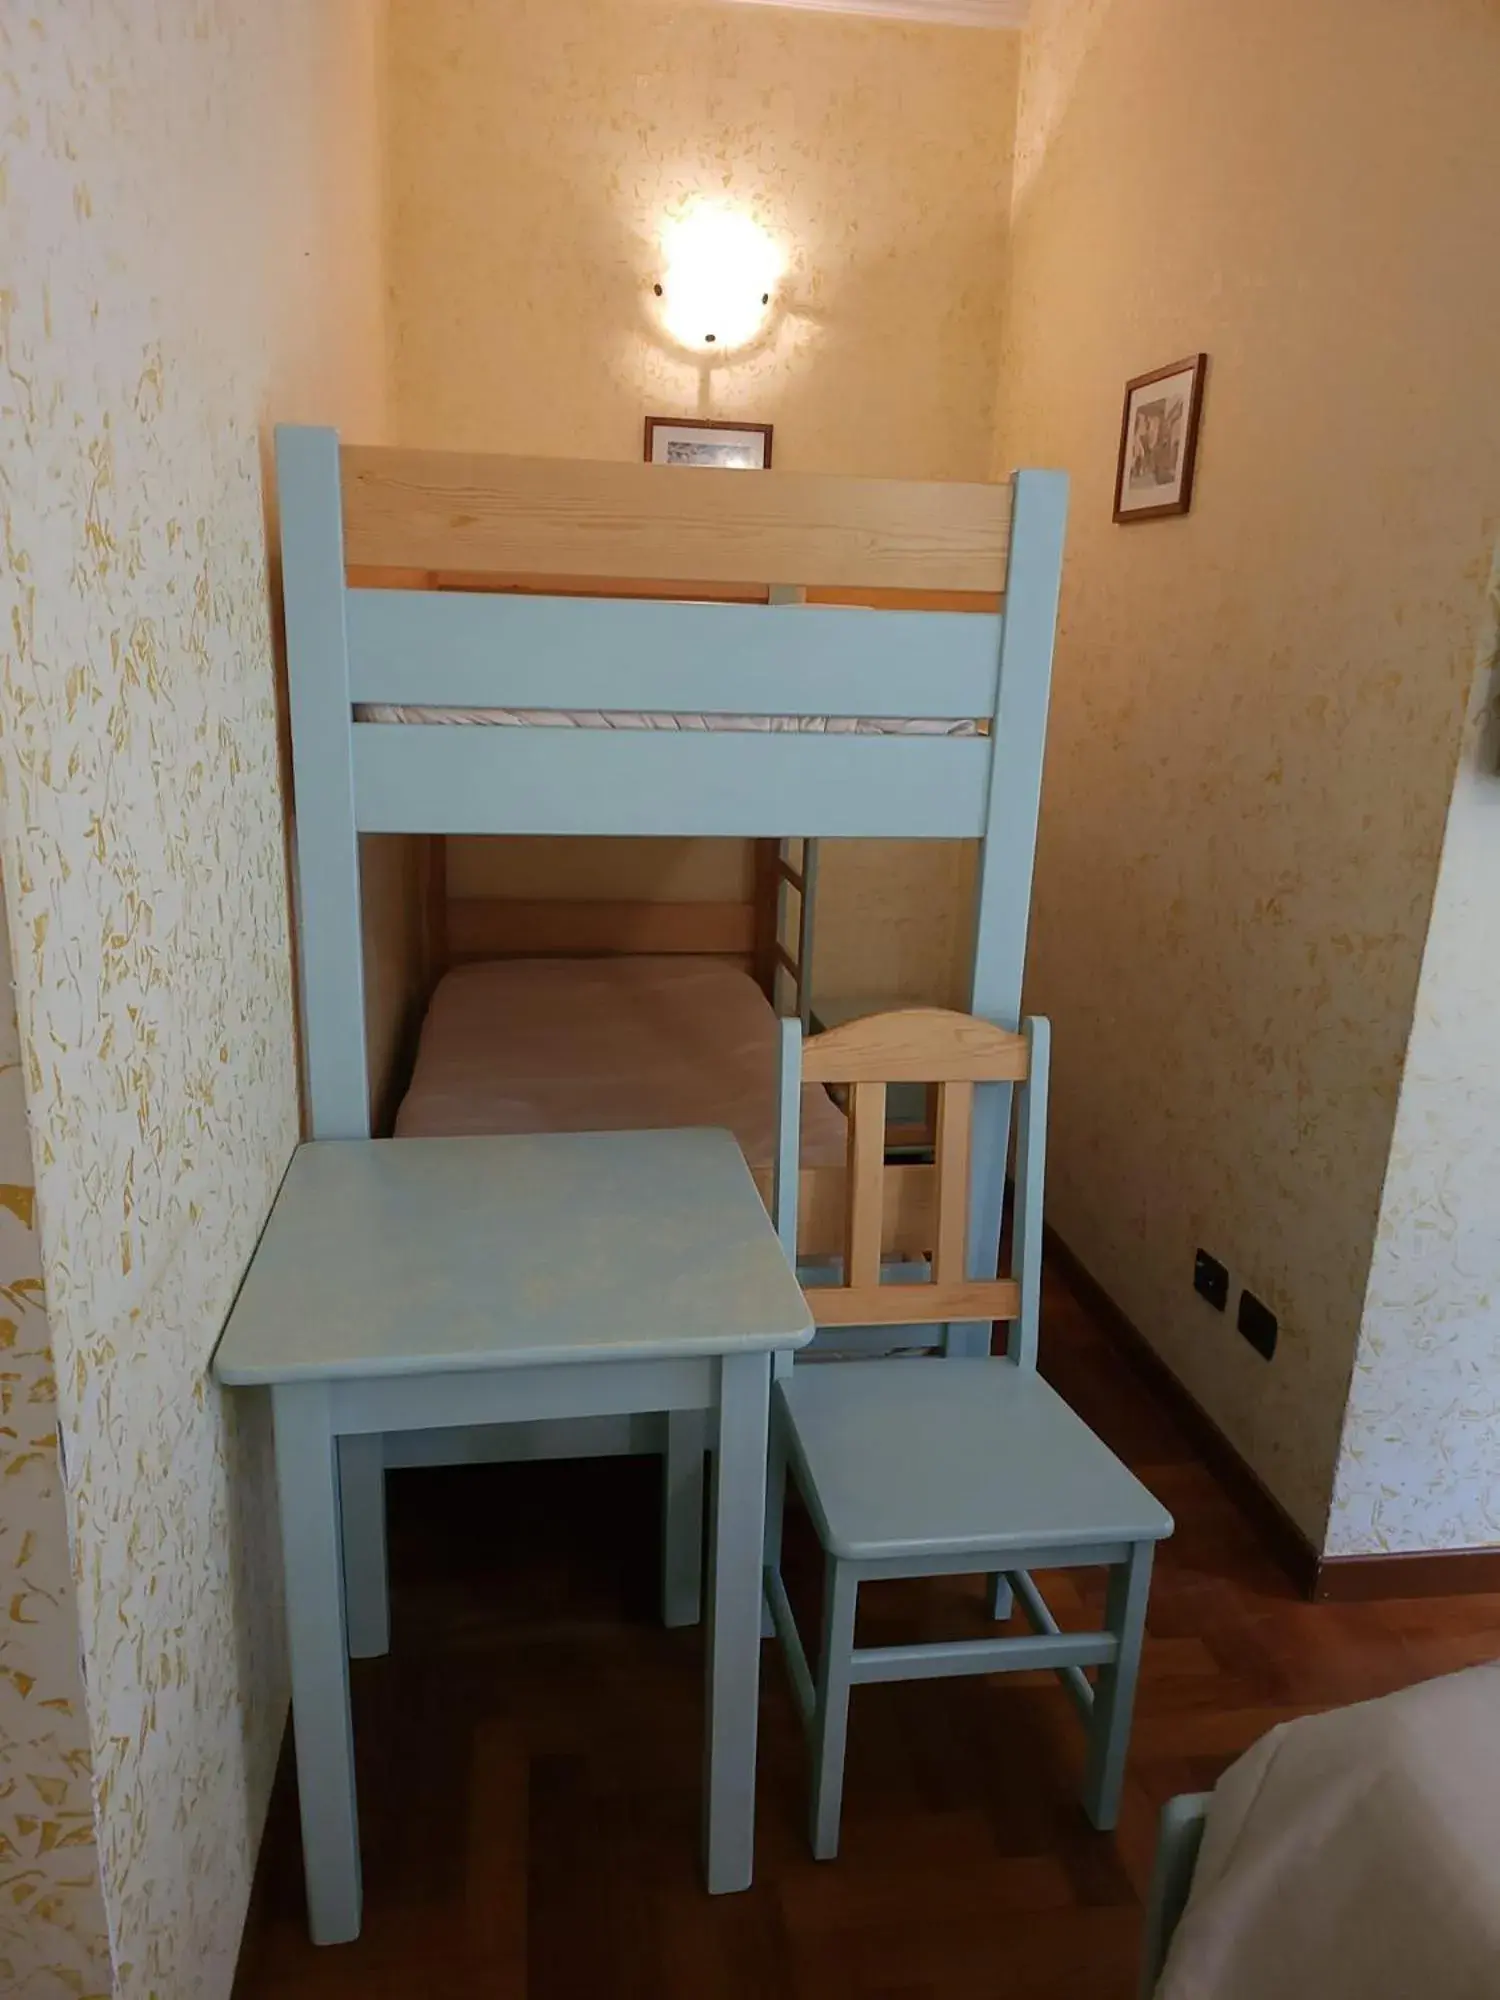 Bunk Bed in St. Peter's Rooms Rome